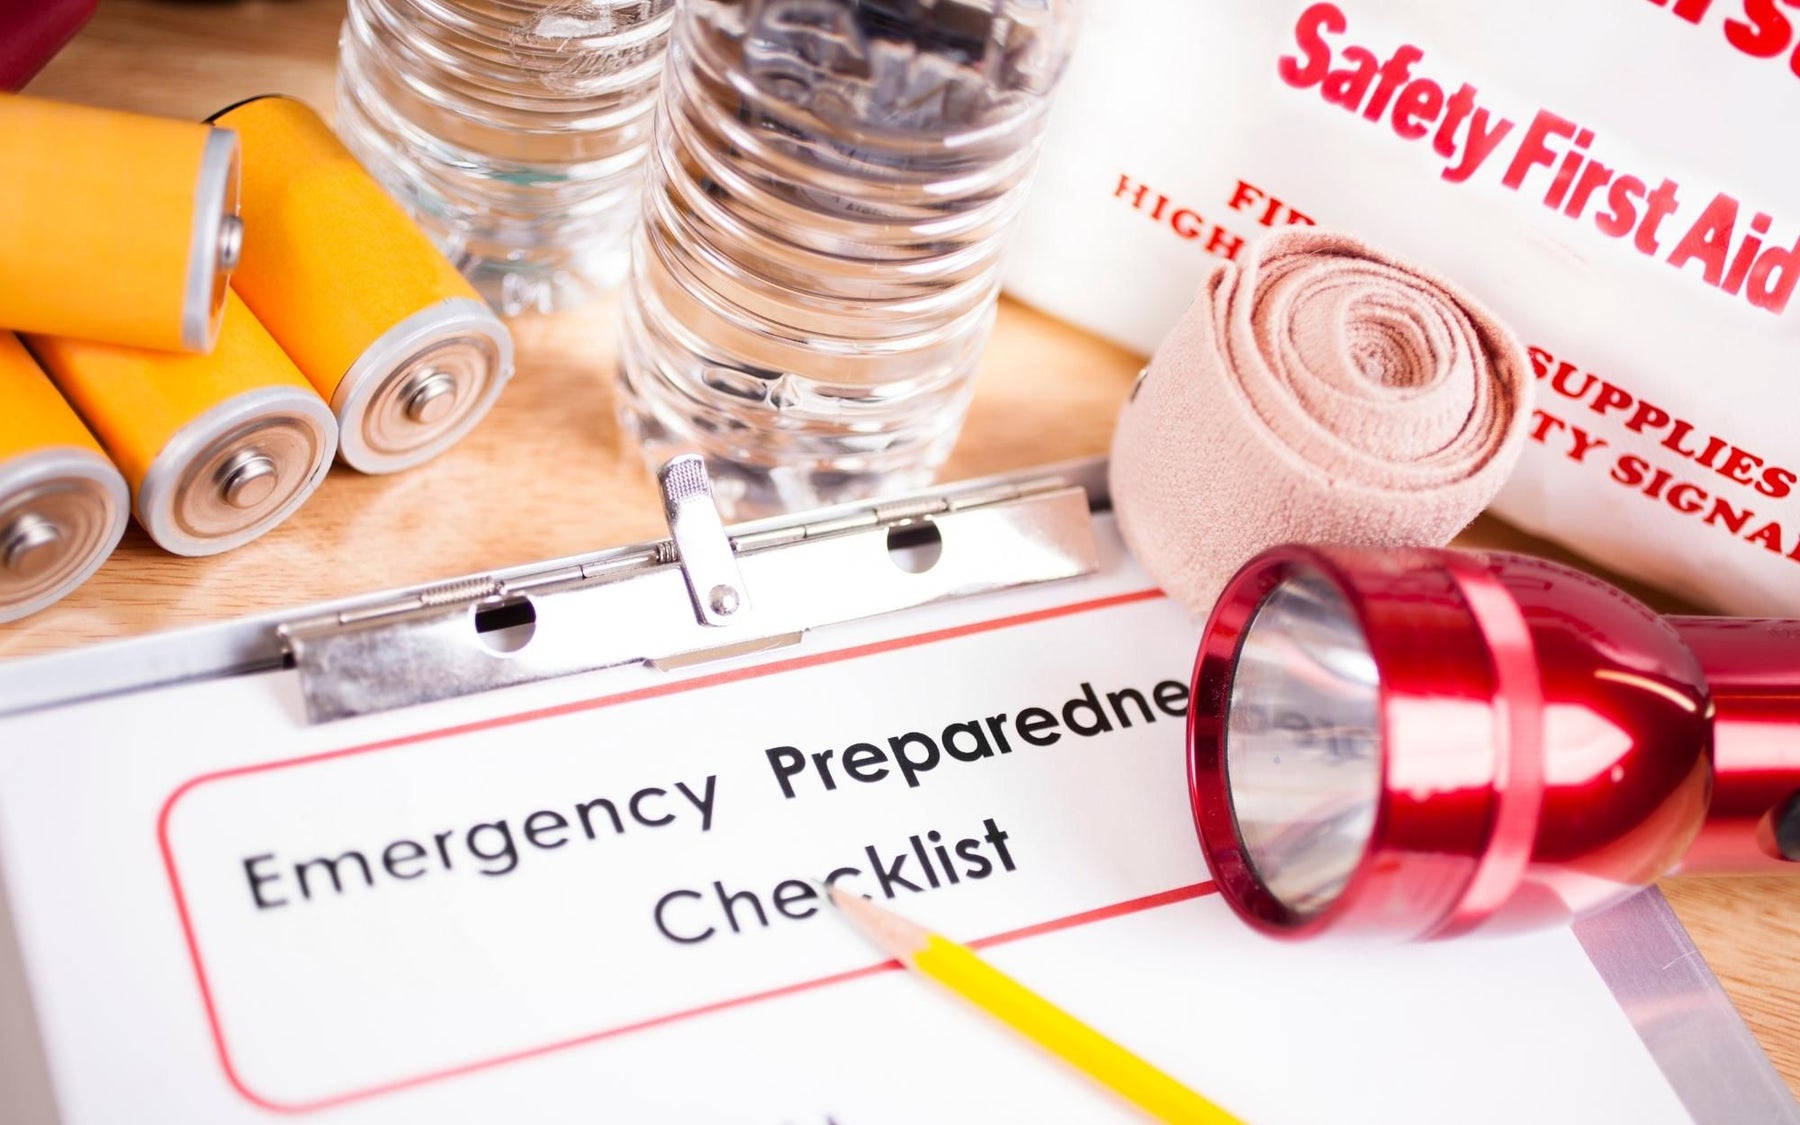 A Complete Guide to Emergency Survival Supplies